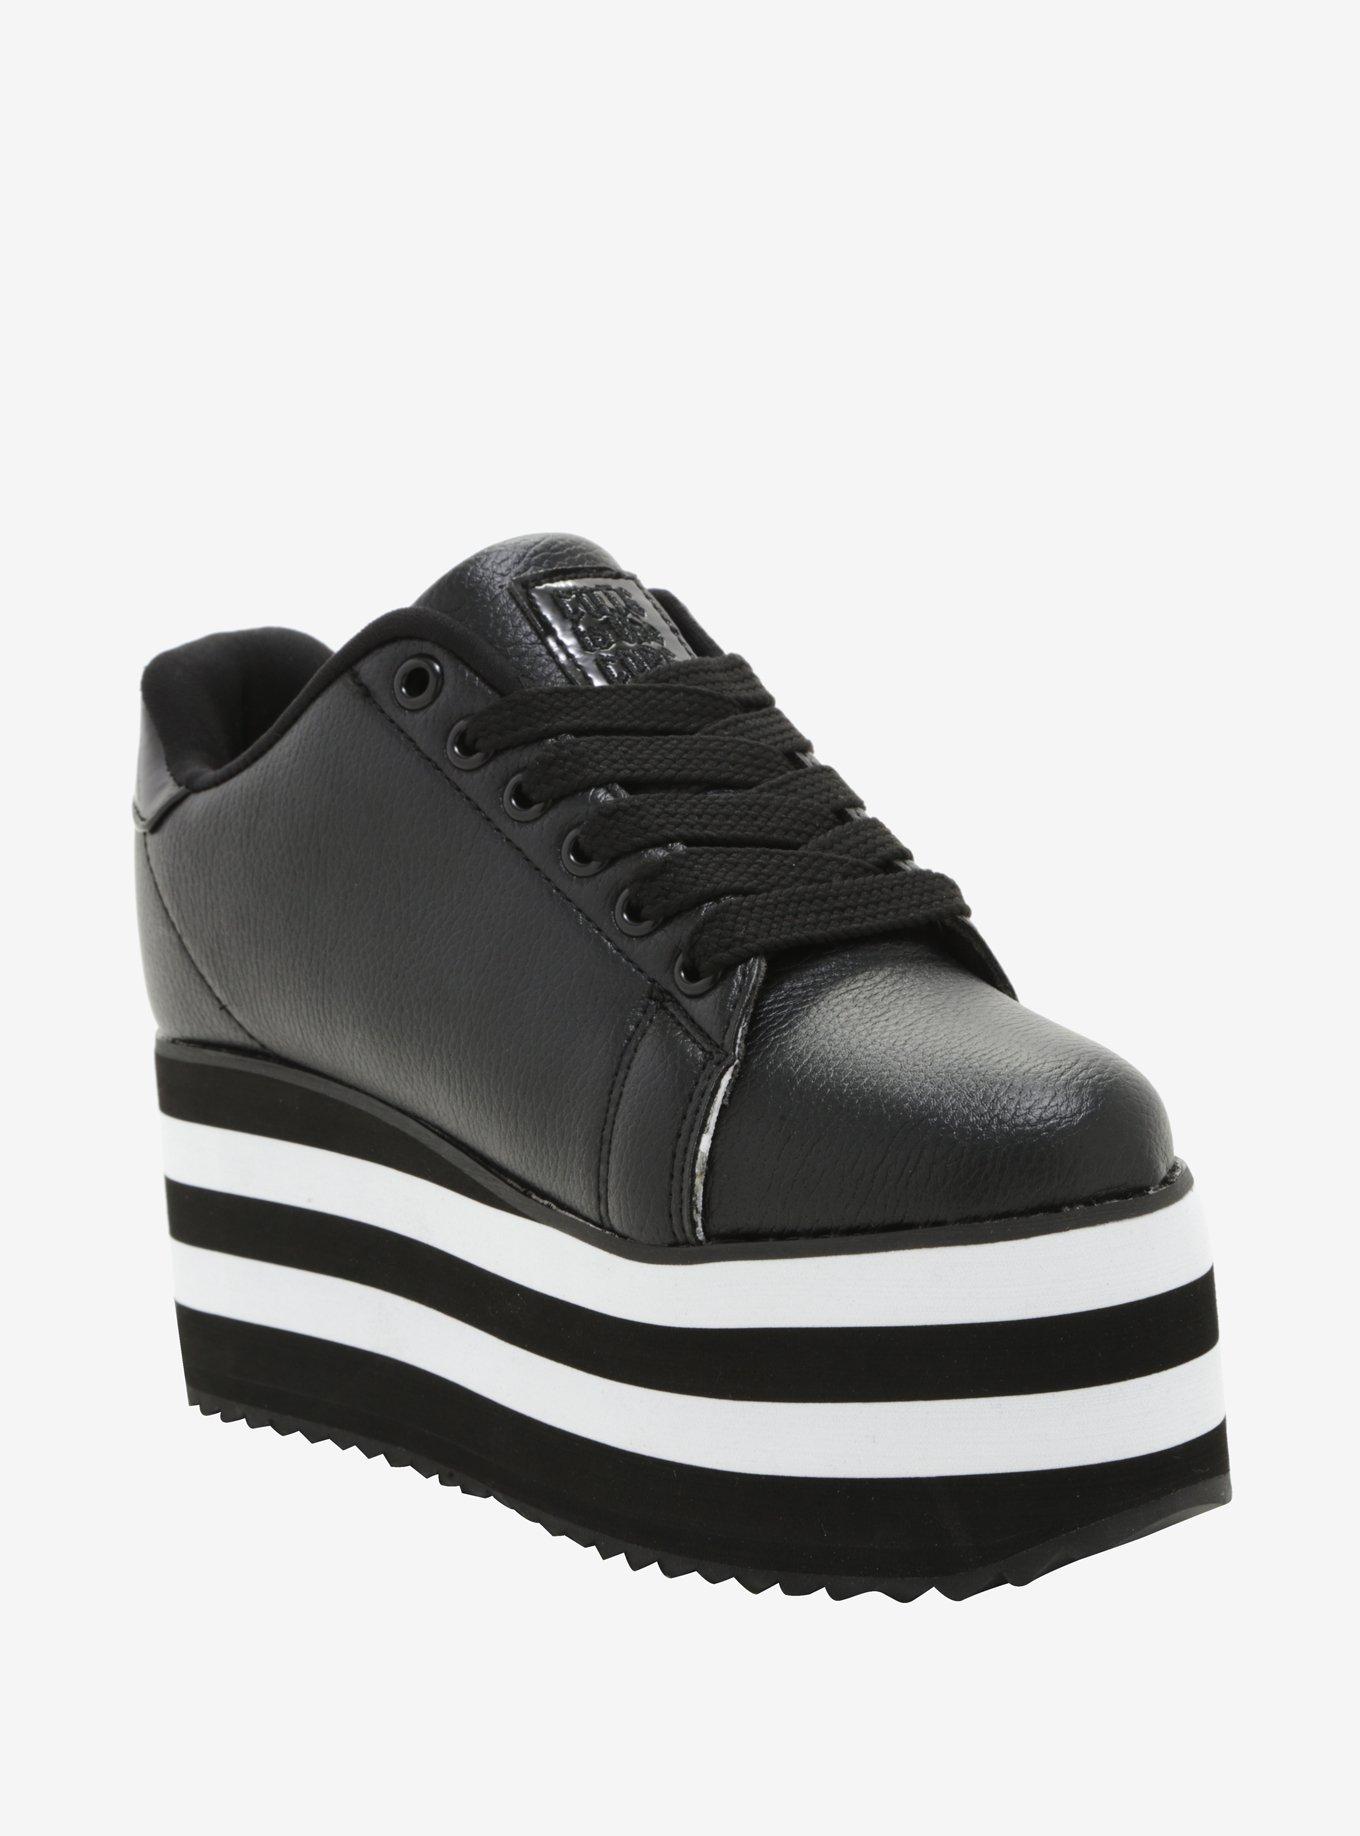 Cute To The Core By YRU LaLa Black & White Sole Sneakers Hot Topic Exclusive, MULTI, hi-res